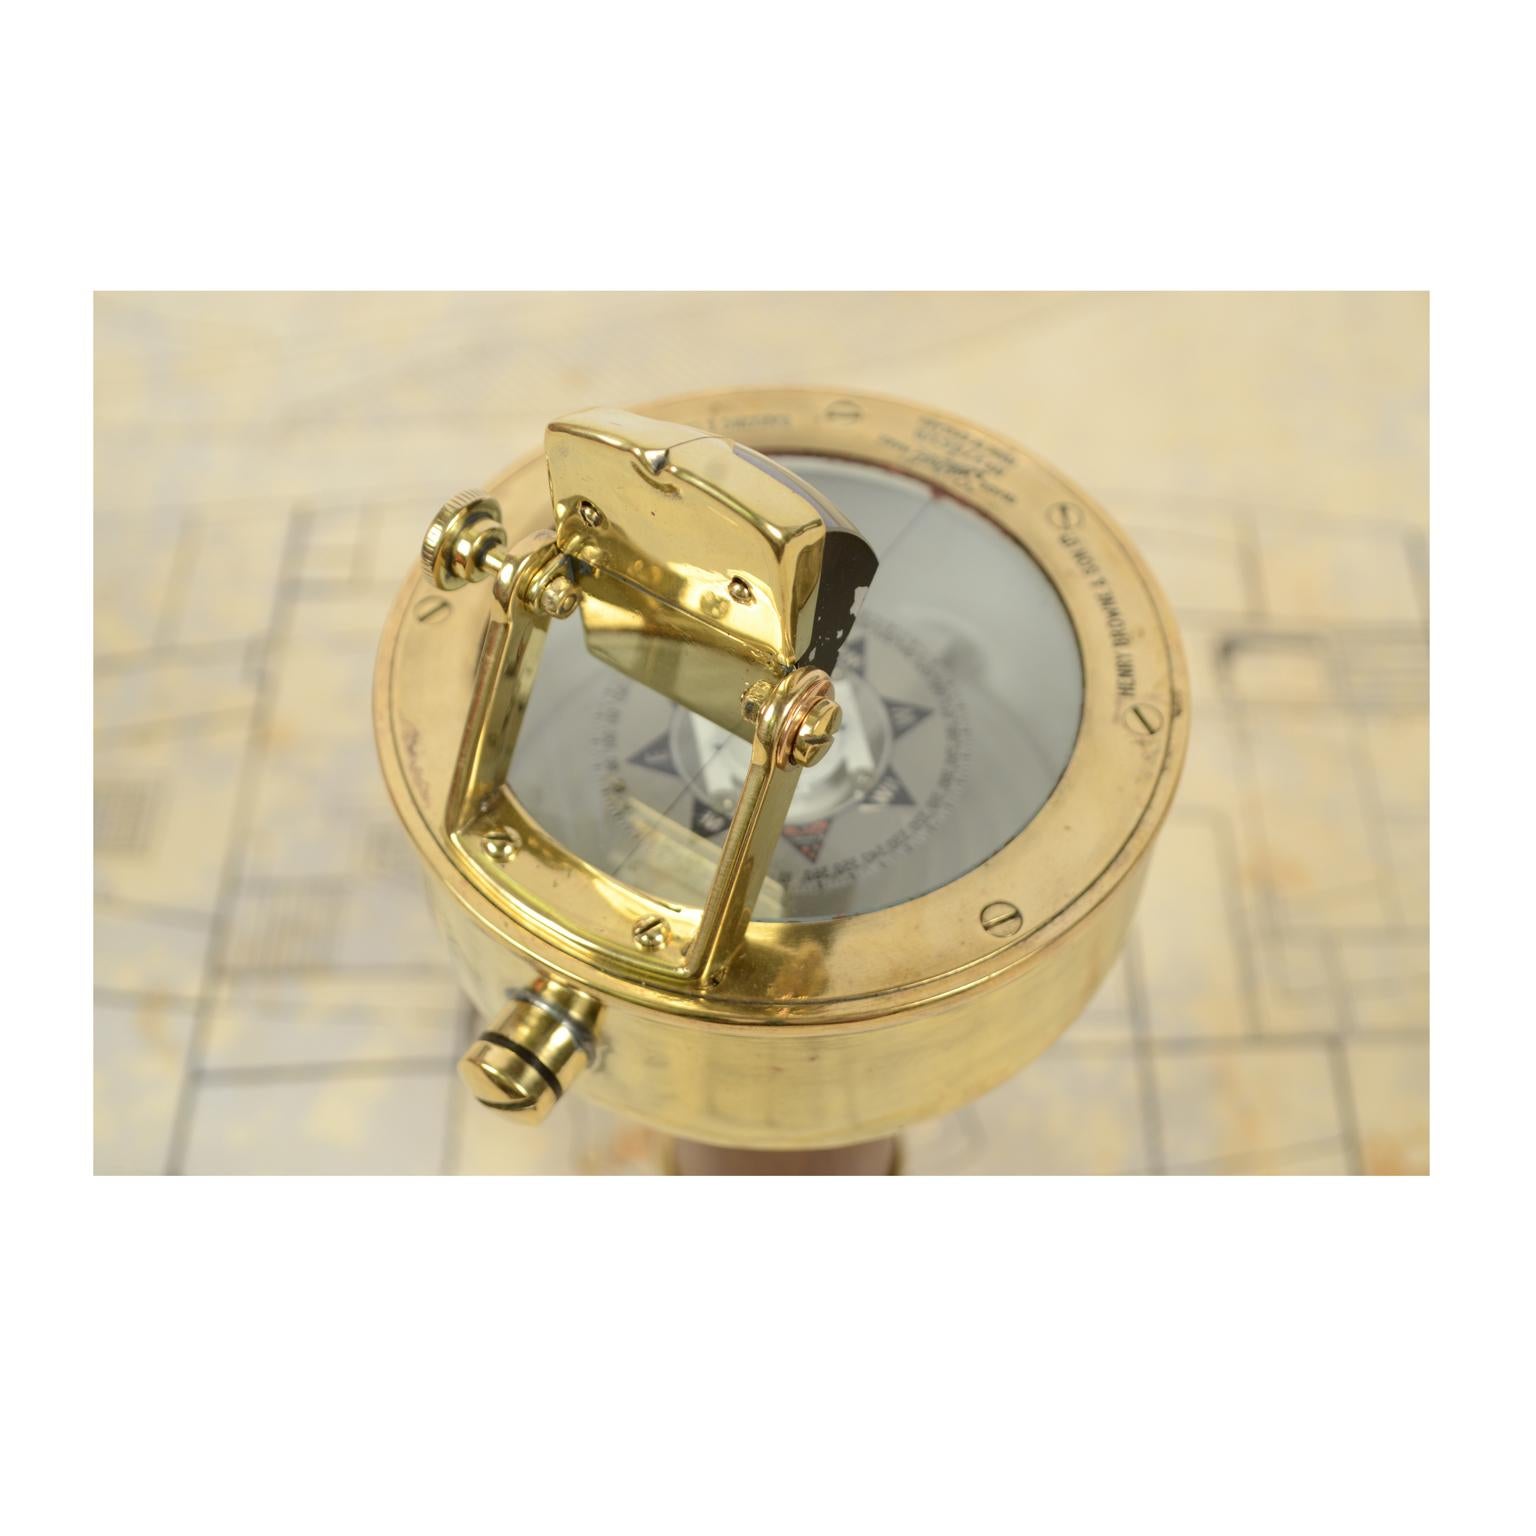 Sestrel Compass Late 19th Century, Brass and Wood Support base made of Brass 1